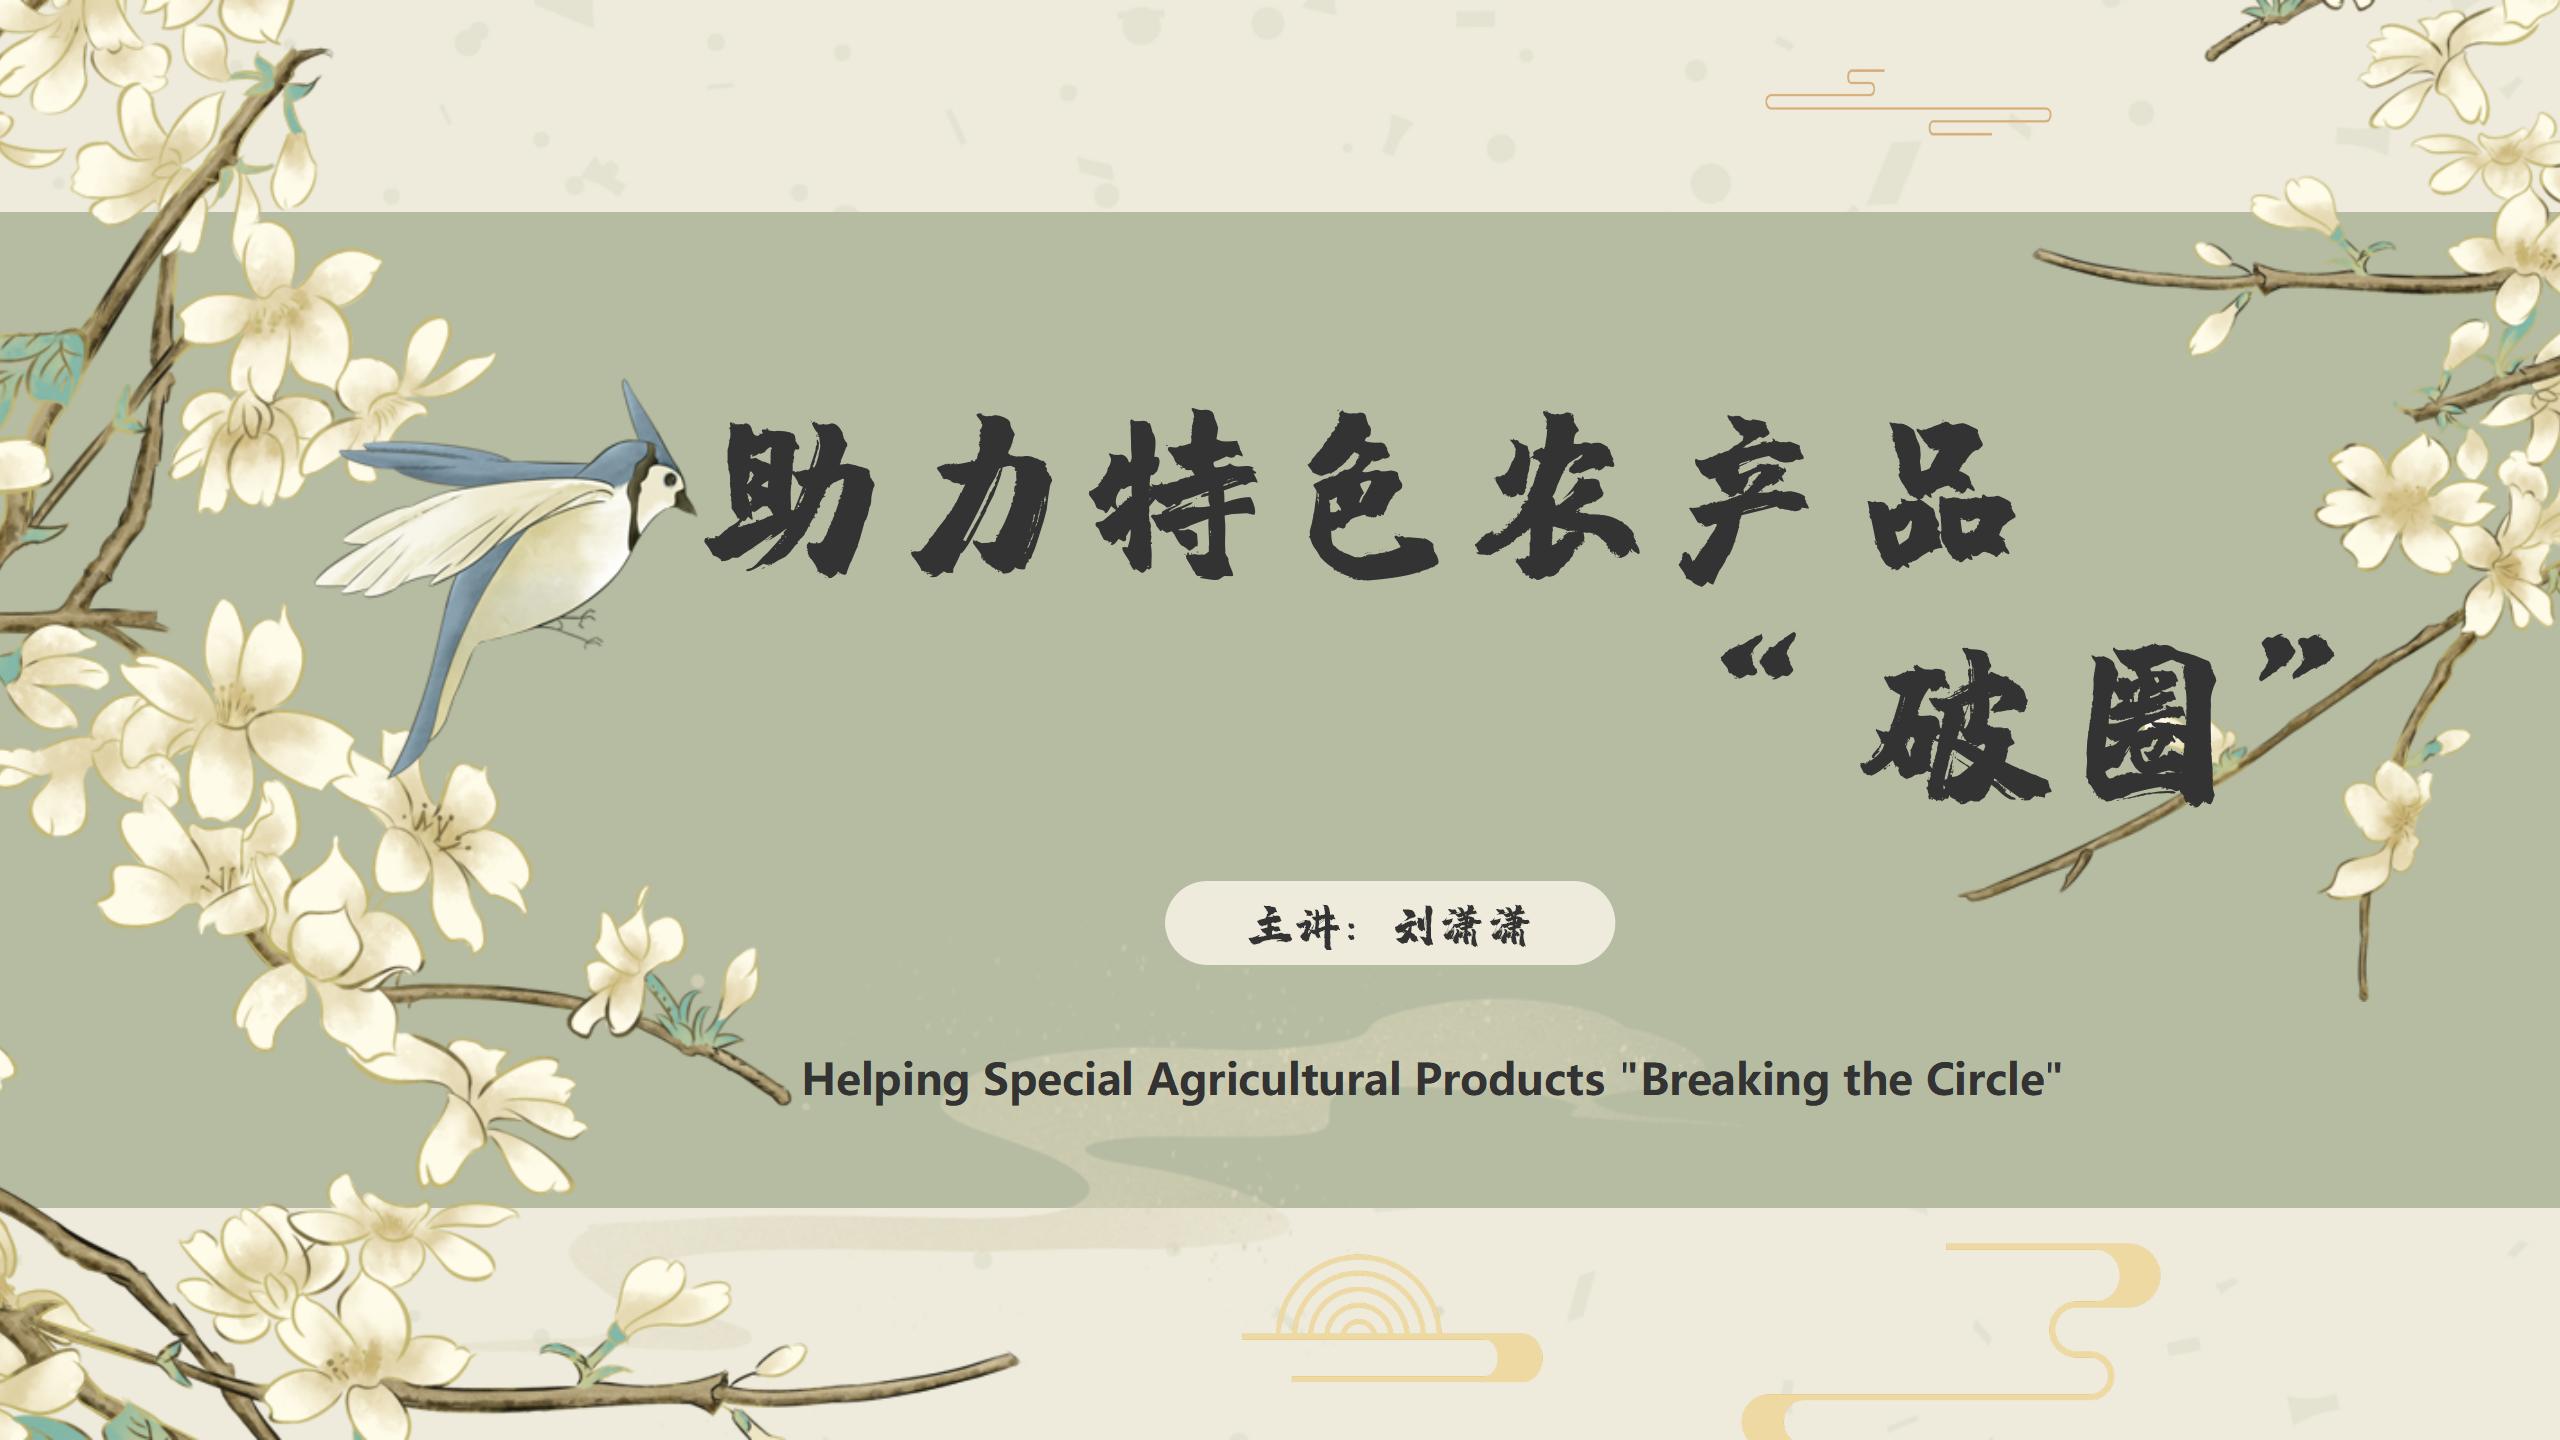 Helping Special Agricultural Products “Breaking the Circle”